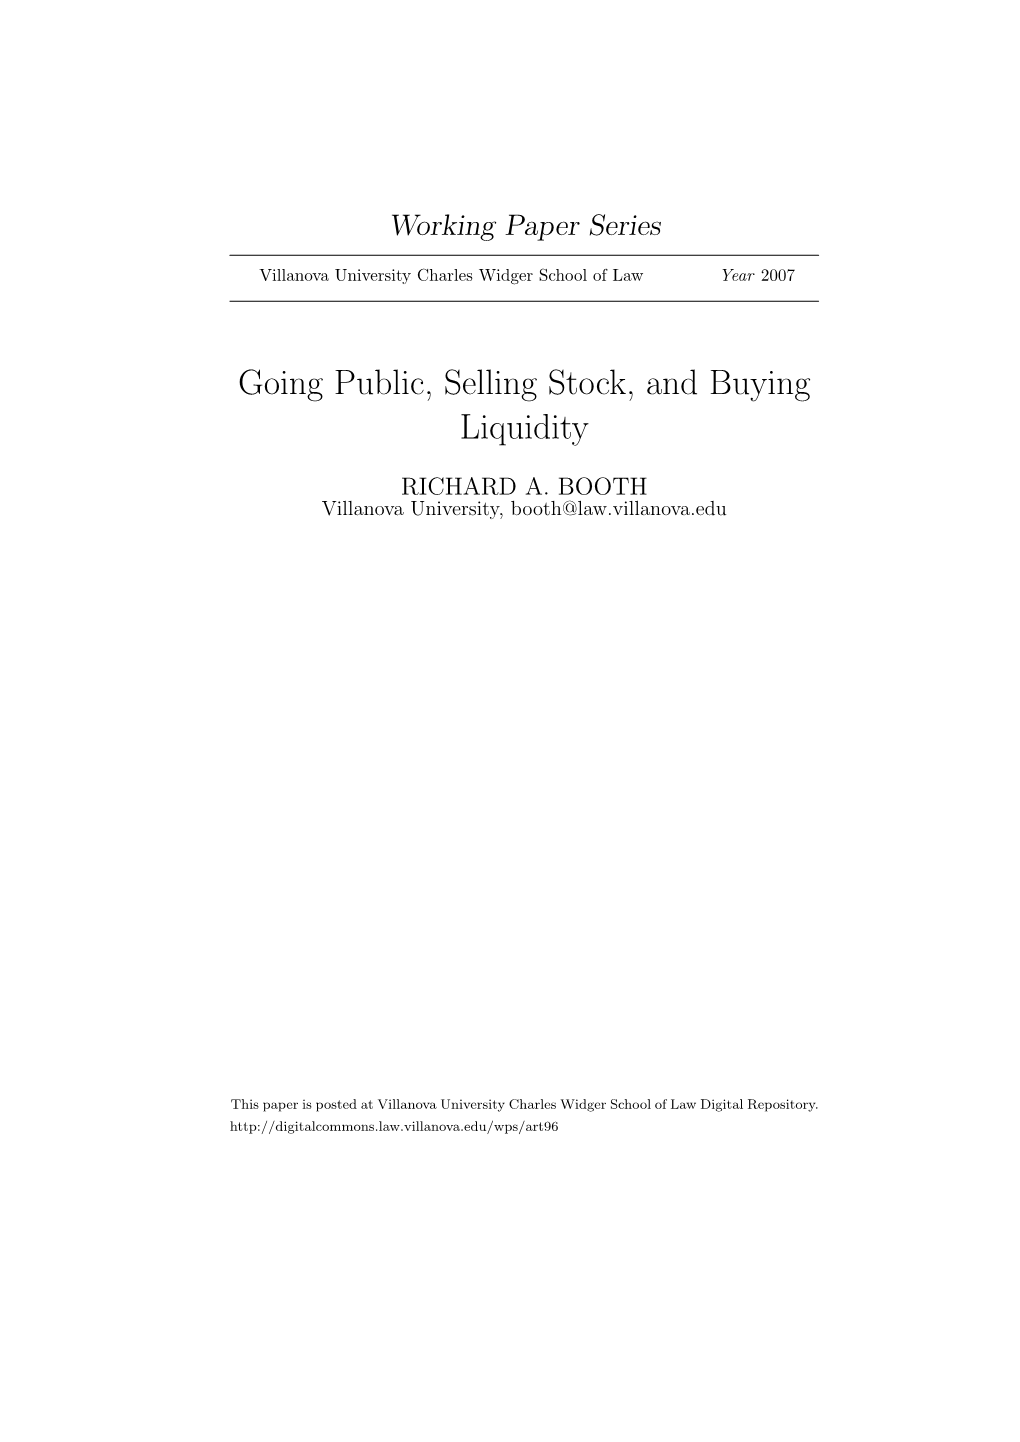 Going Public, Selling Stock, and Buying Liquidity